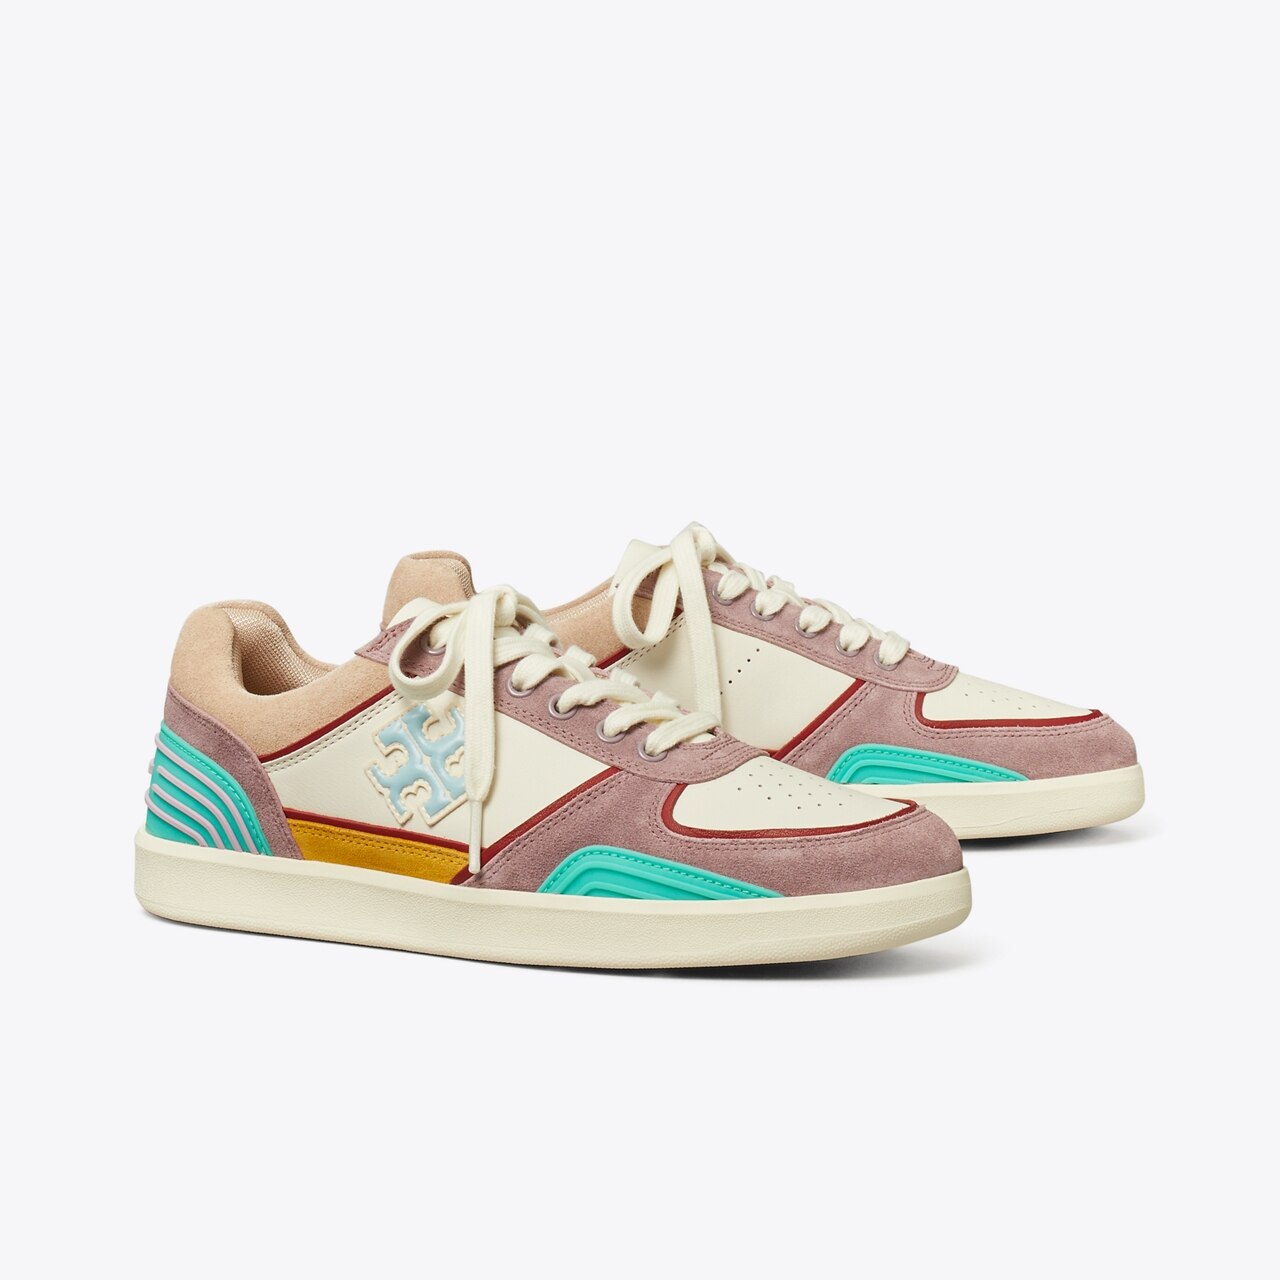 LOUIS VUITTON TRAINER NEW YORK CITY OF DREAMS LIMITED… | LV 10 US 11.5